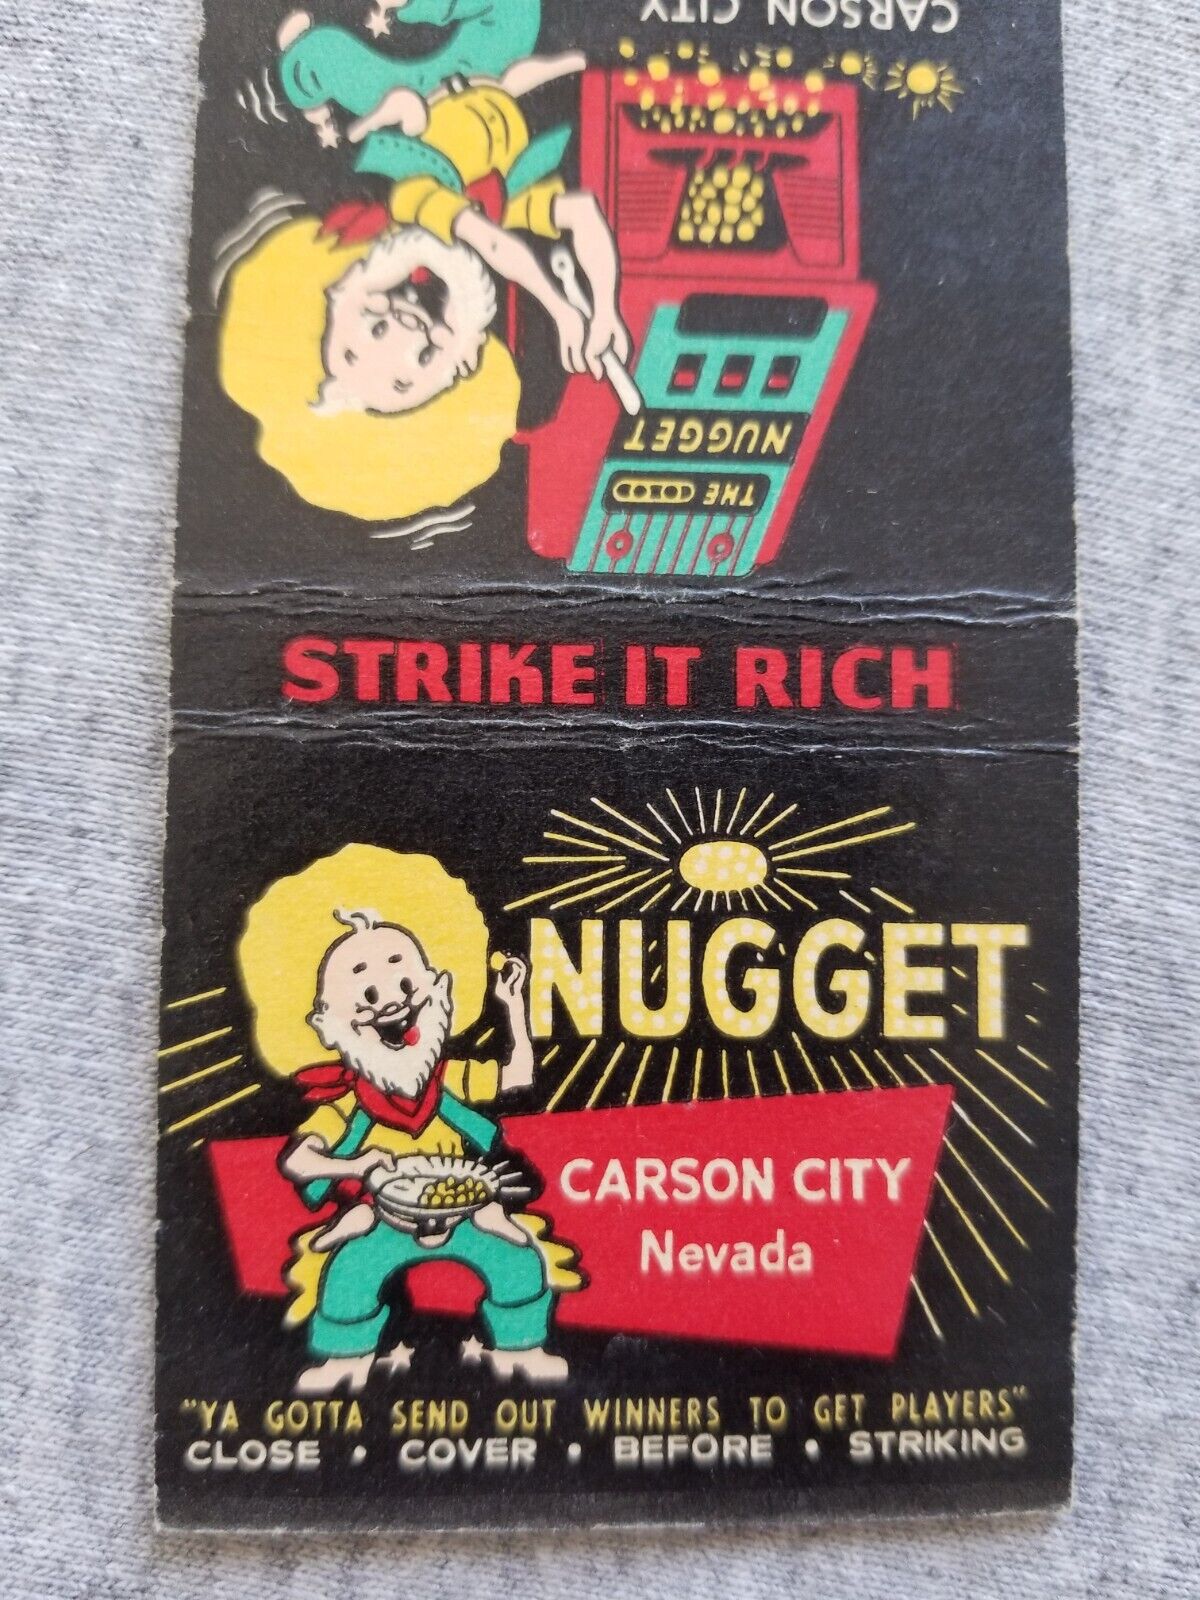 Vtg FS Matchbook Cover Carson City NV Nugget Casino Home Awful Awful Sandwich 